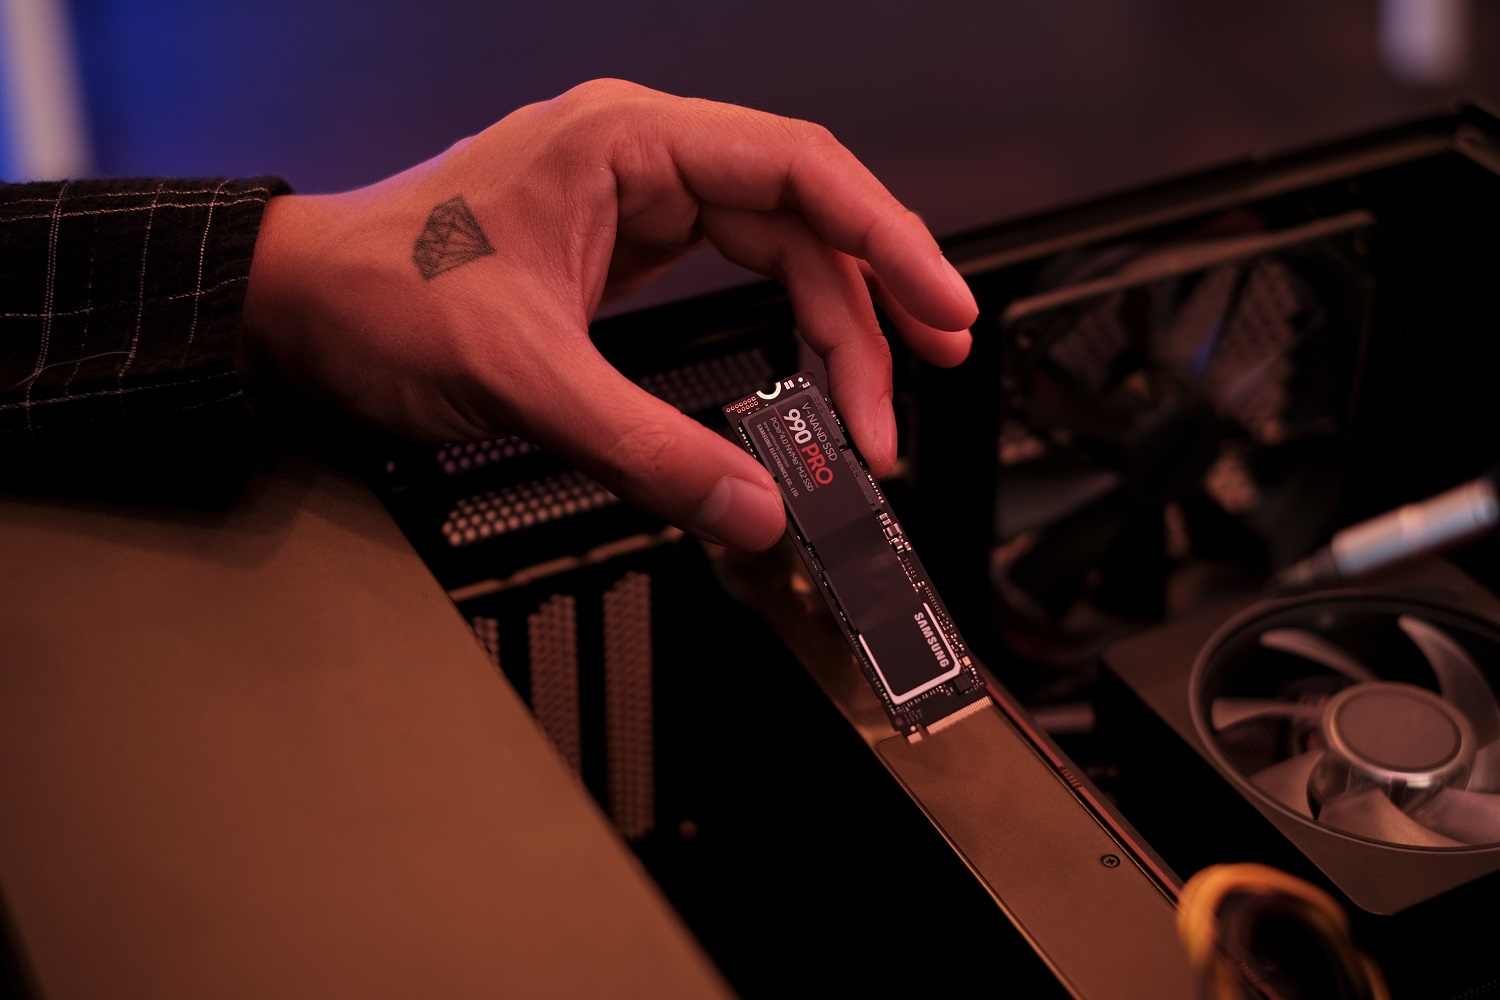 The Samsung 990 Pro SSD being installed in a PC.